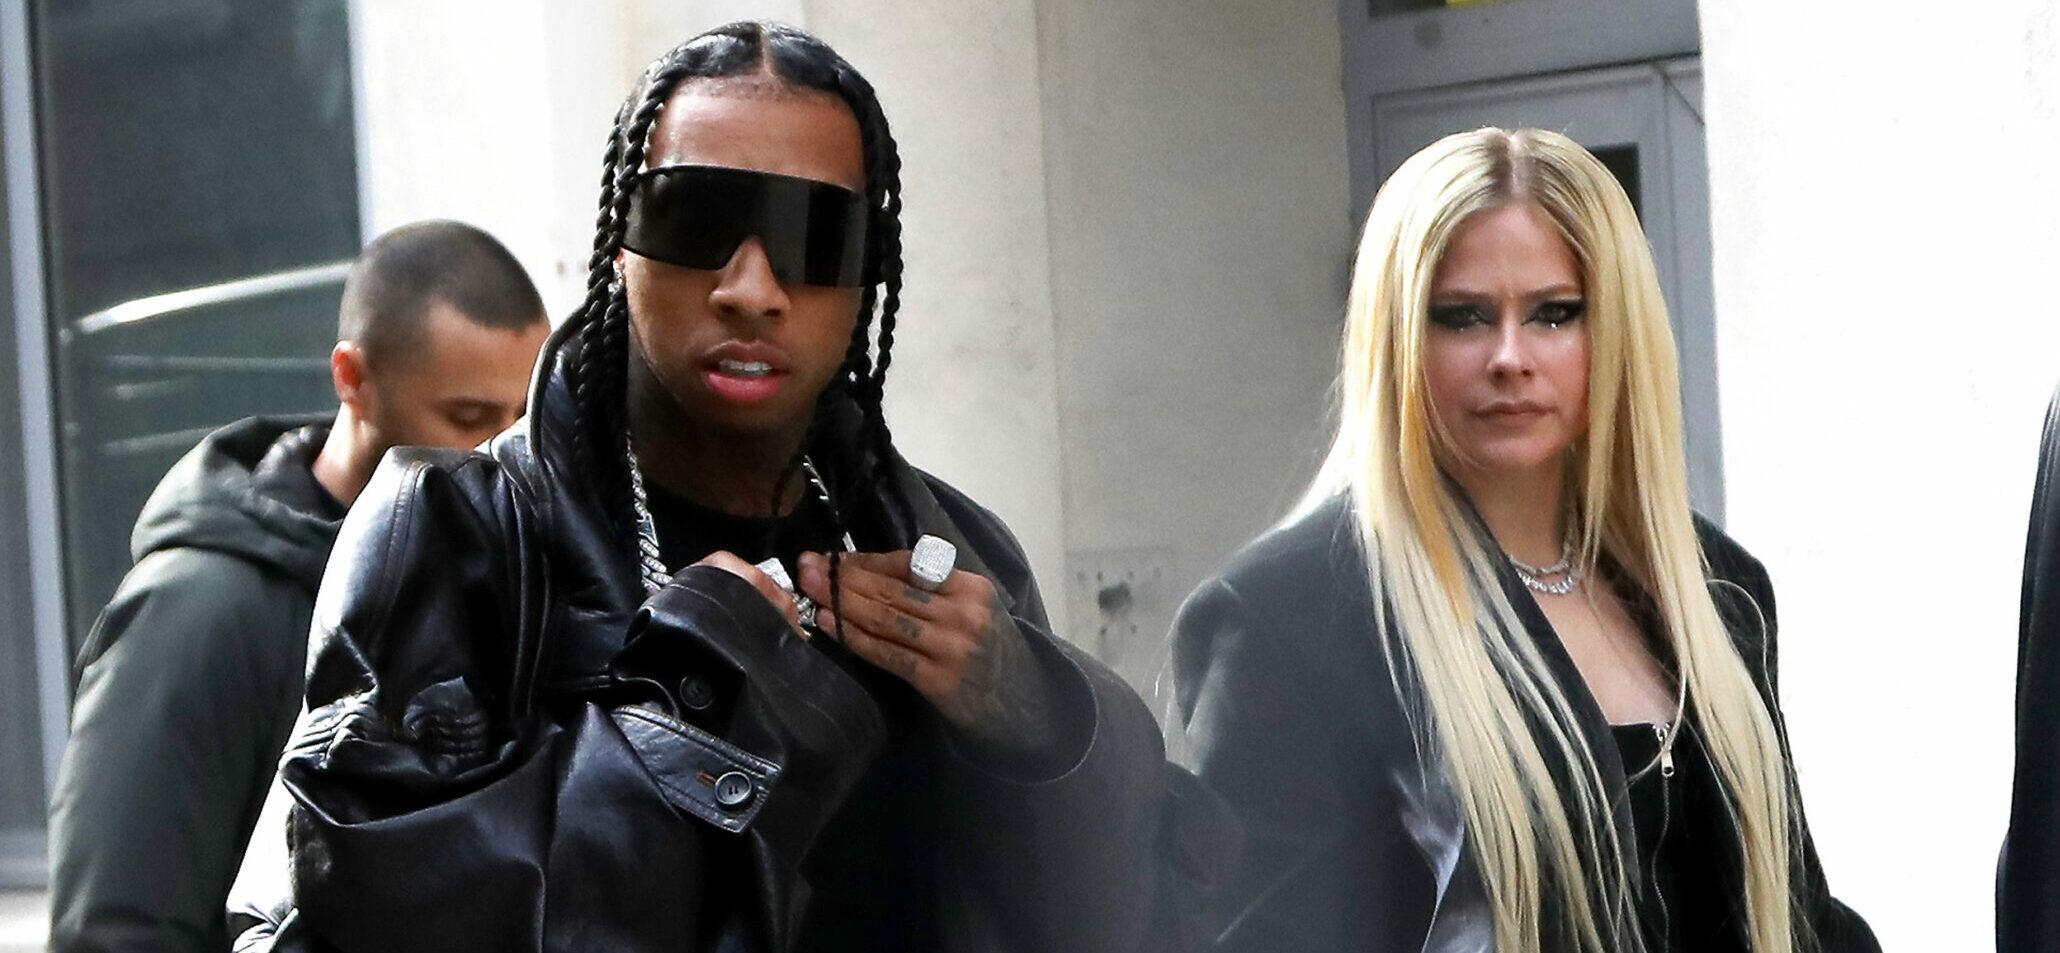 Avril Lavigne And Tyga Are ‘Totally Done’ With Each Other After Whirlwind Romance